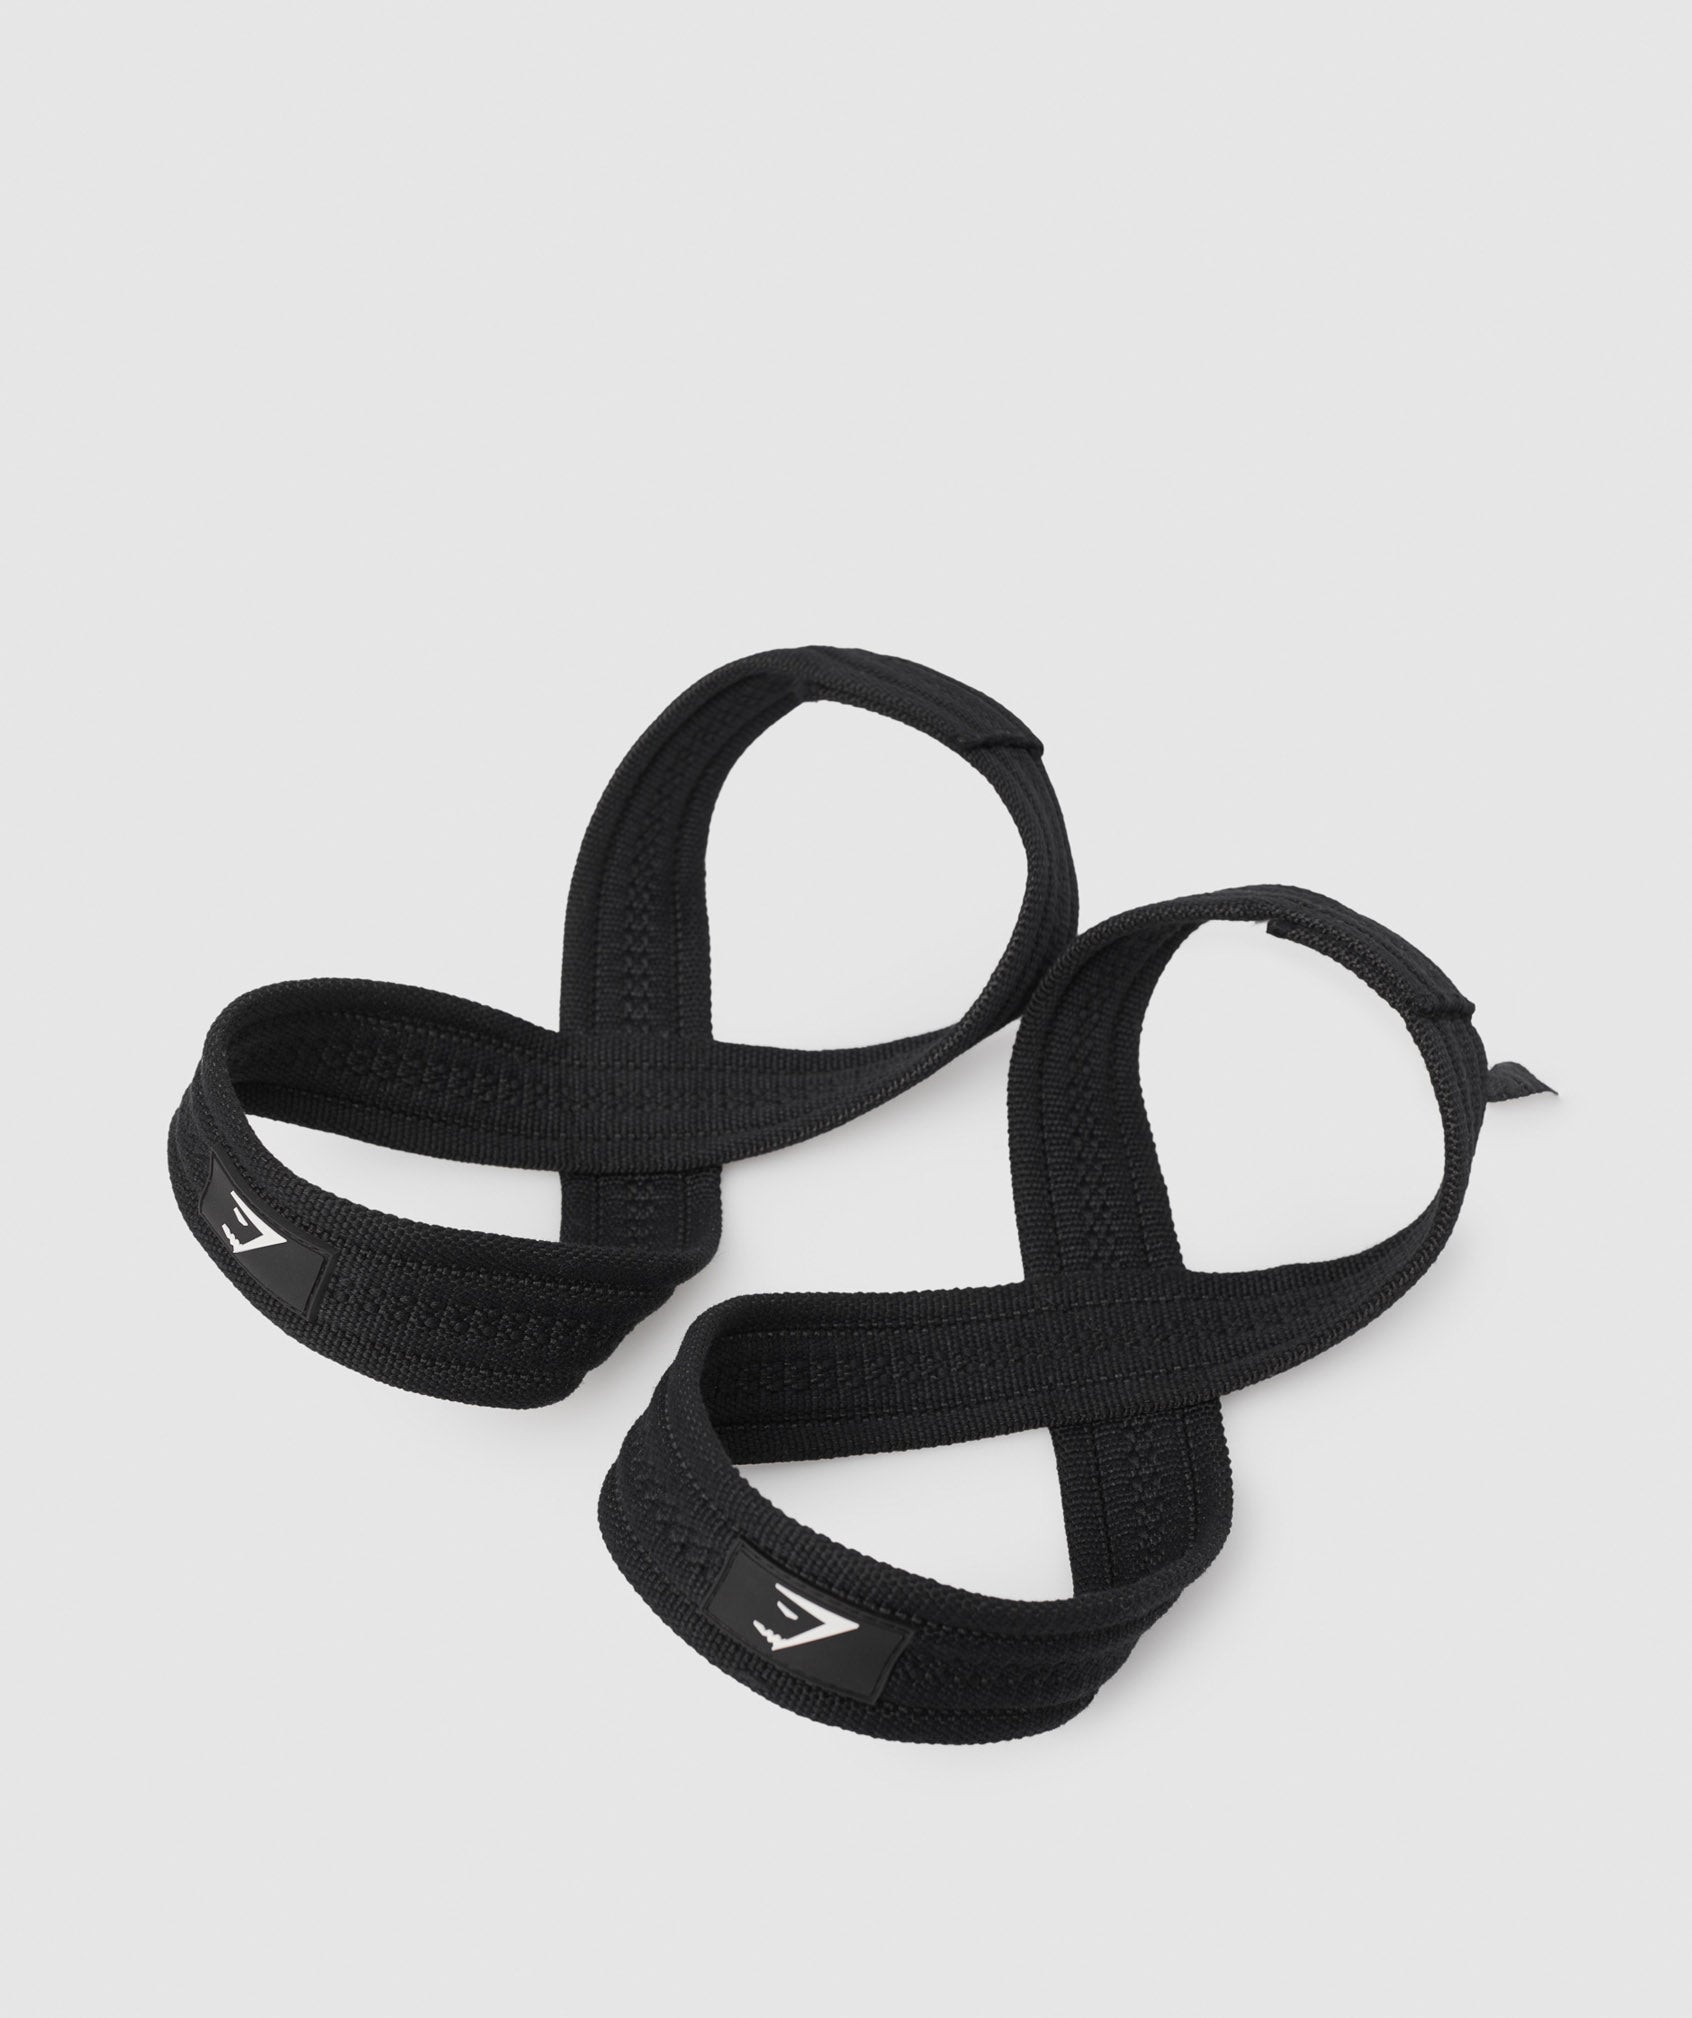 Gymshark Figure 8 Lifting Straps - Black – Client 446 100K products